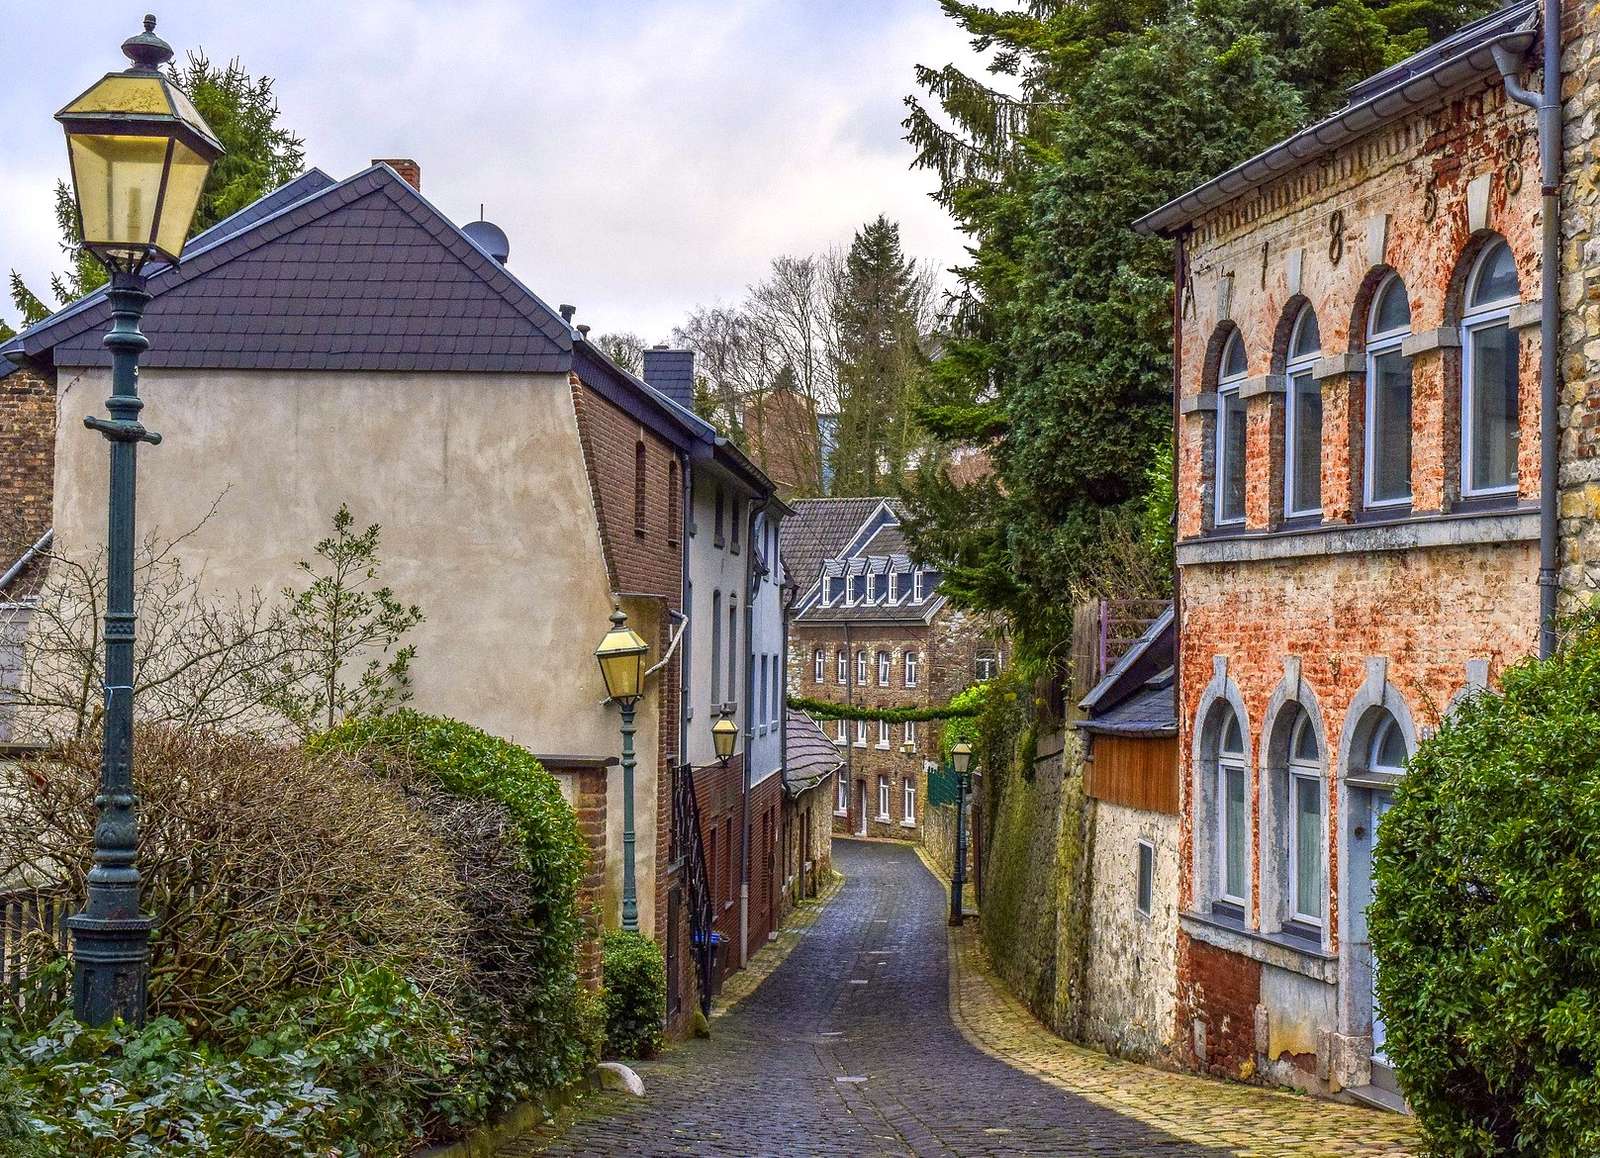 The medieval town of Stolberg (Germany) jigsaw puzzle online